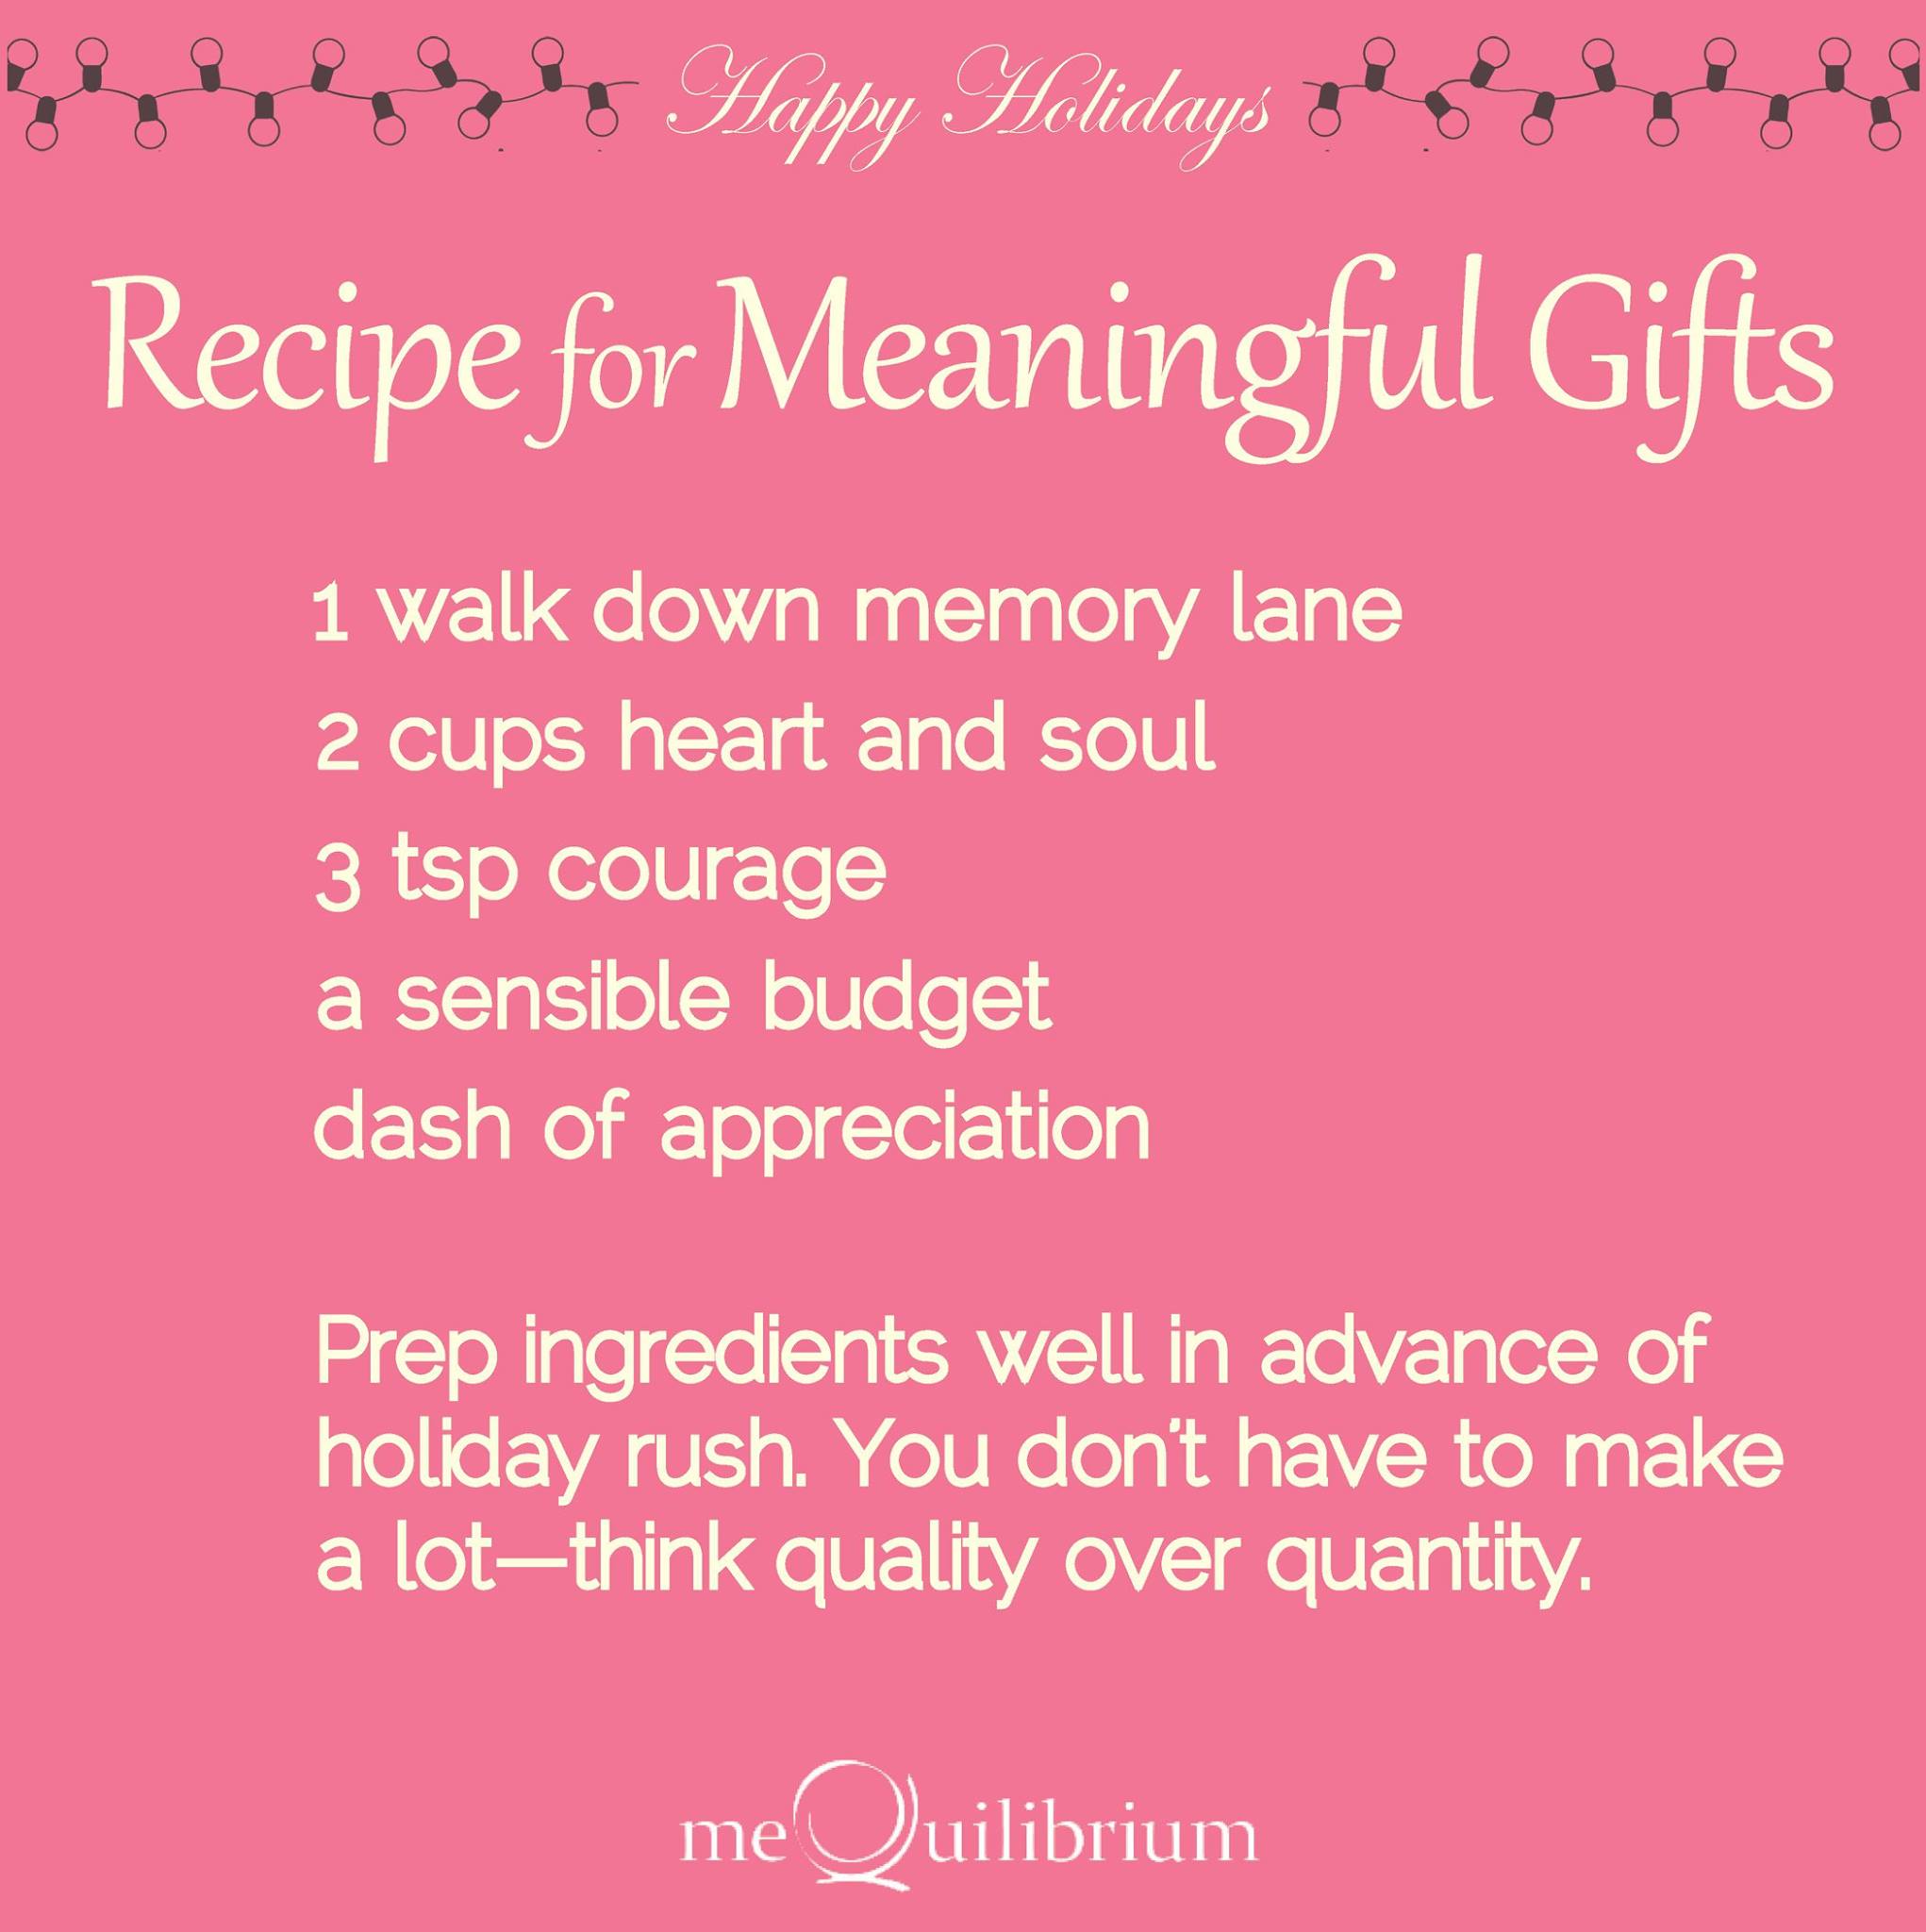 Recipe for Meaningful Gifts